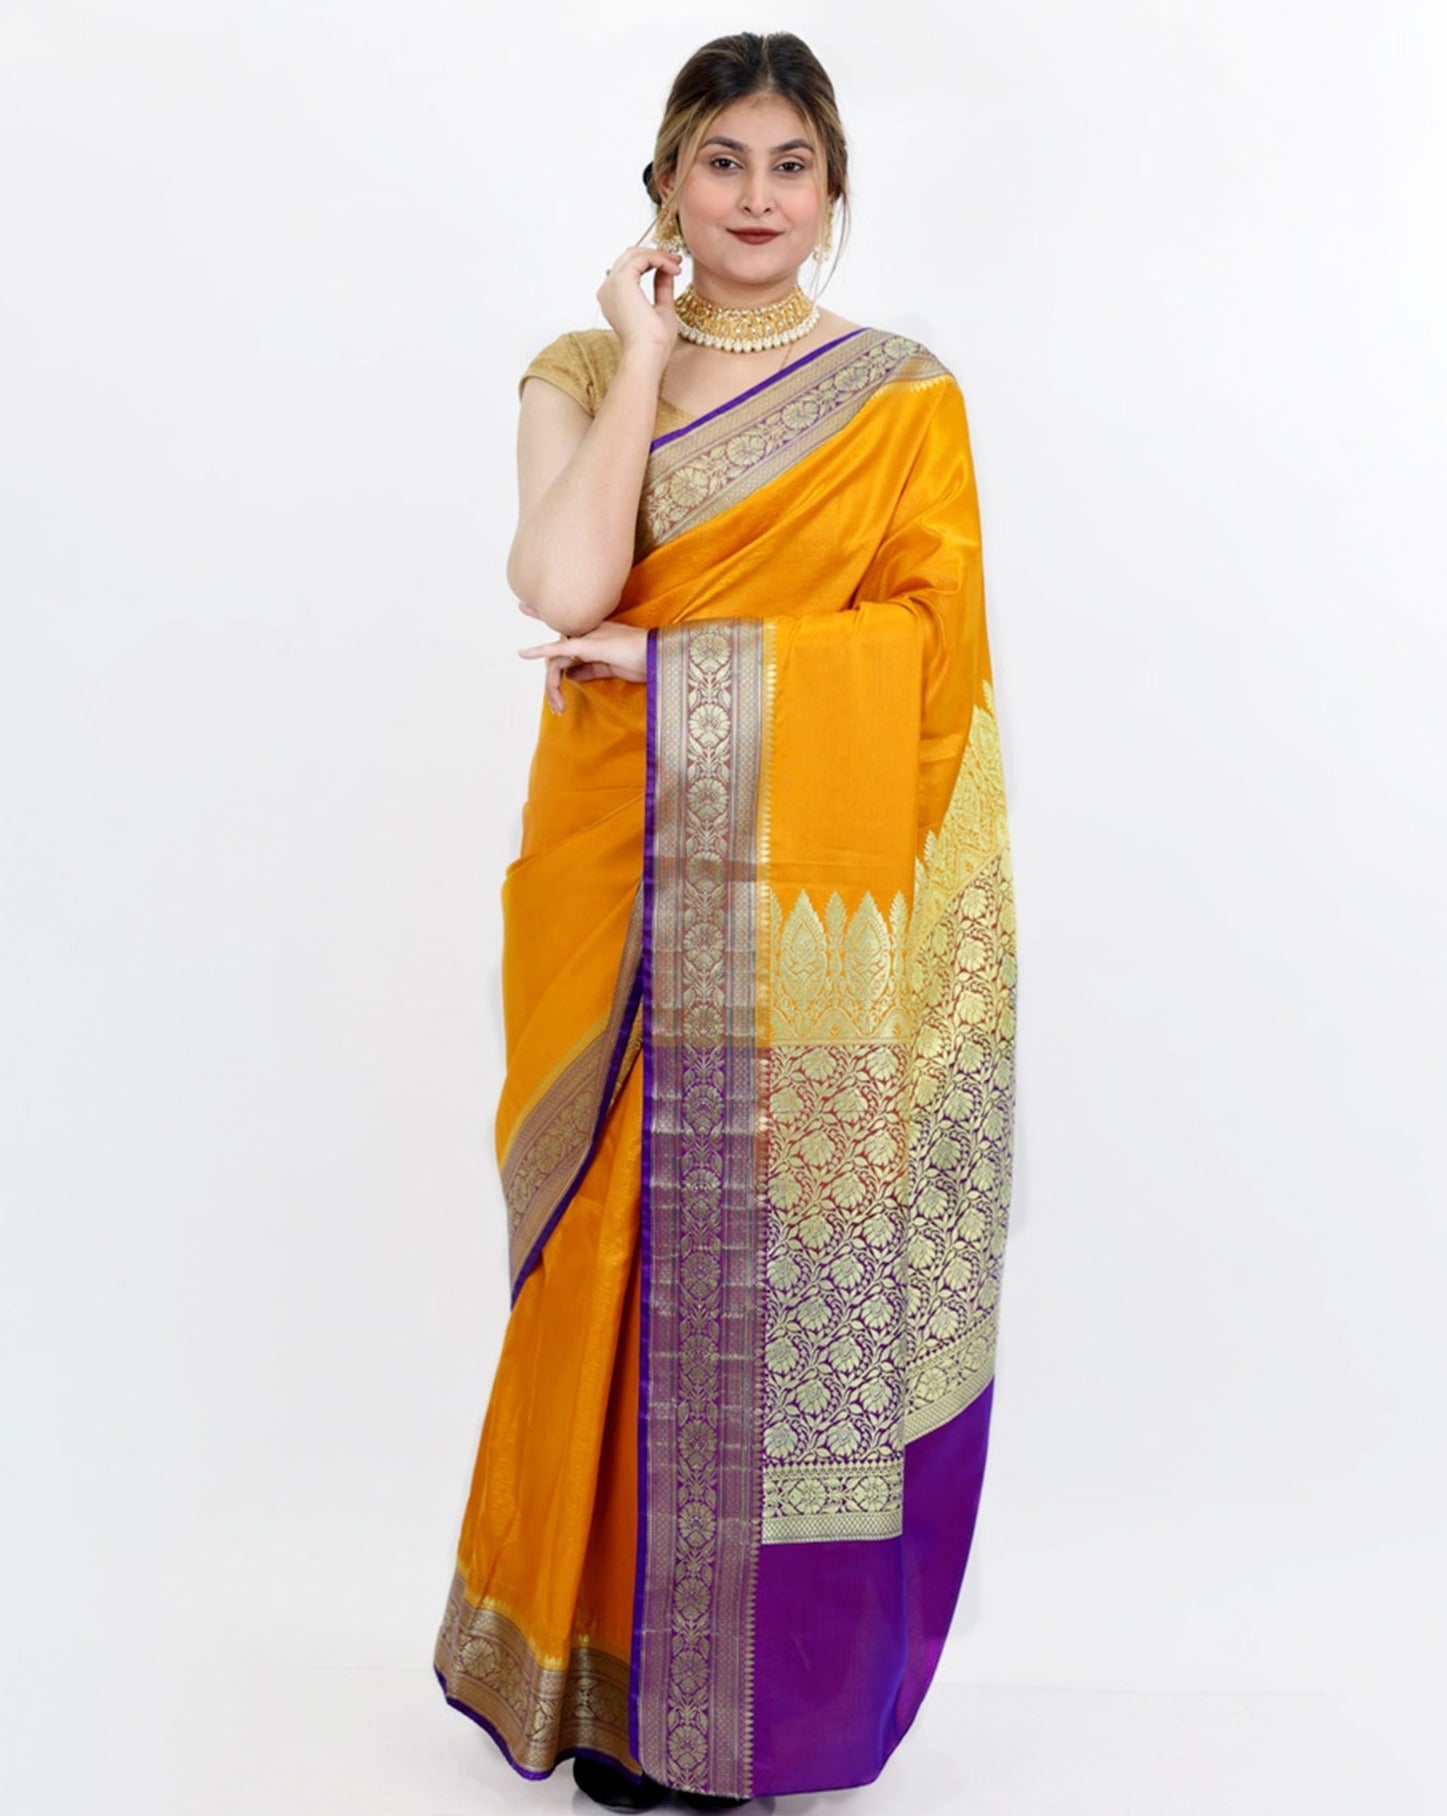 Rose Mary Saree - Red Yellow Blue Combination 👌👌👌 Any body... | Facebook